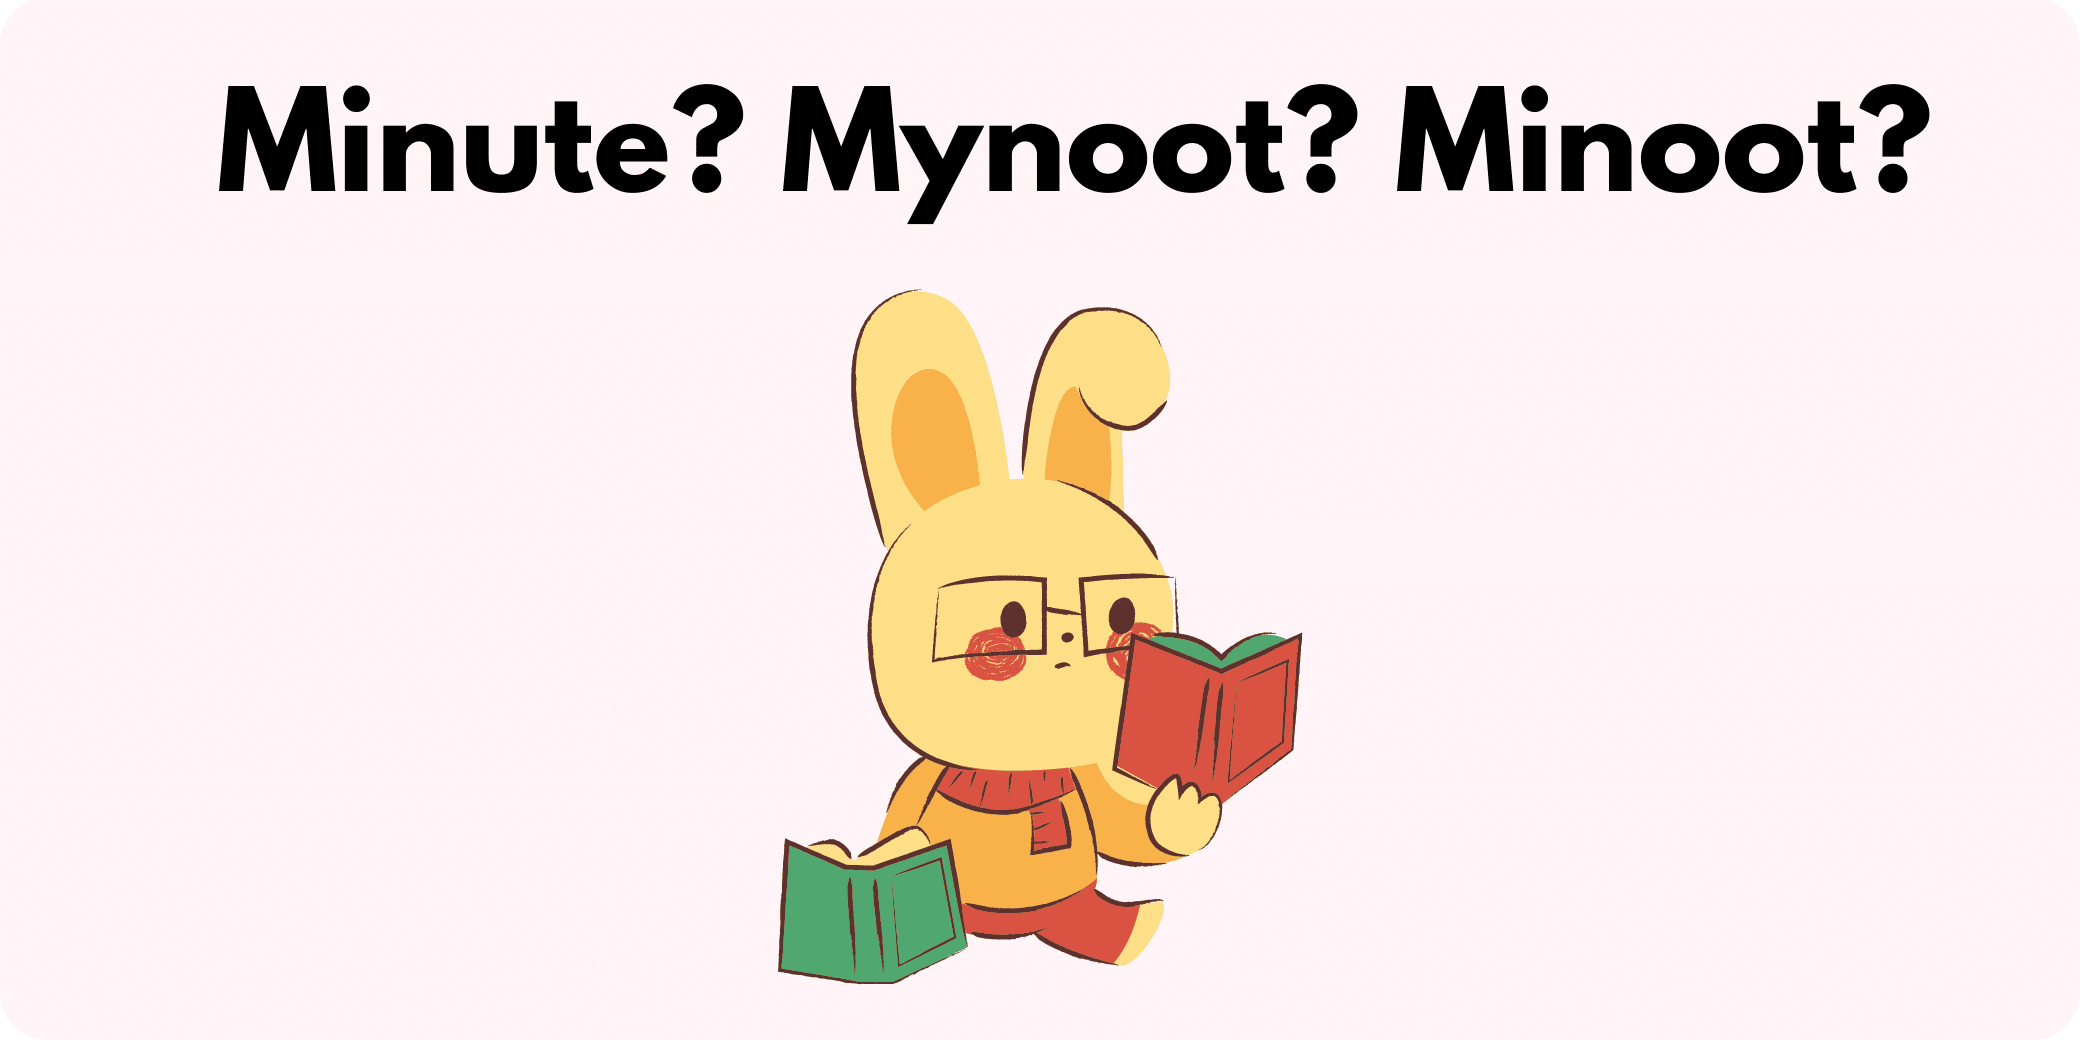 A bunny searching through books with the words "Minute? Mynoot? Minoot?" above him